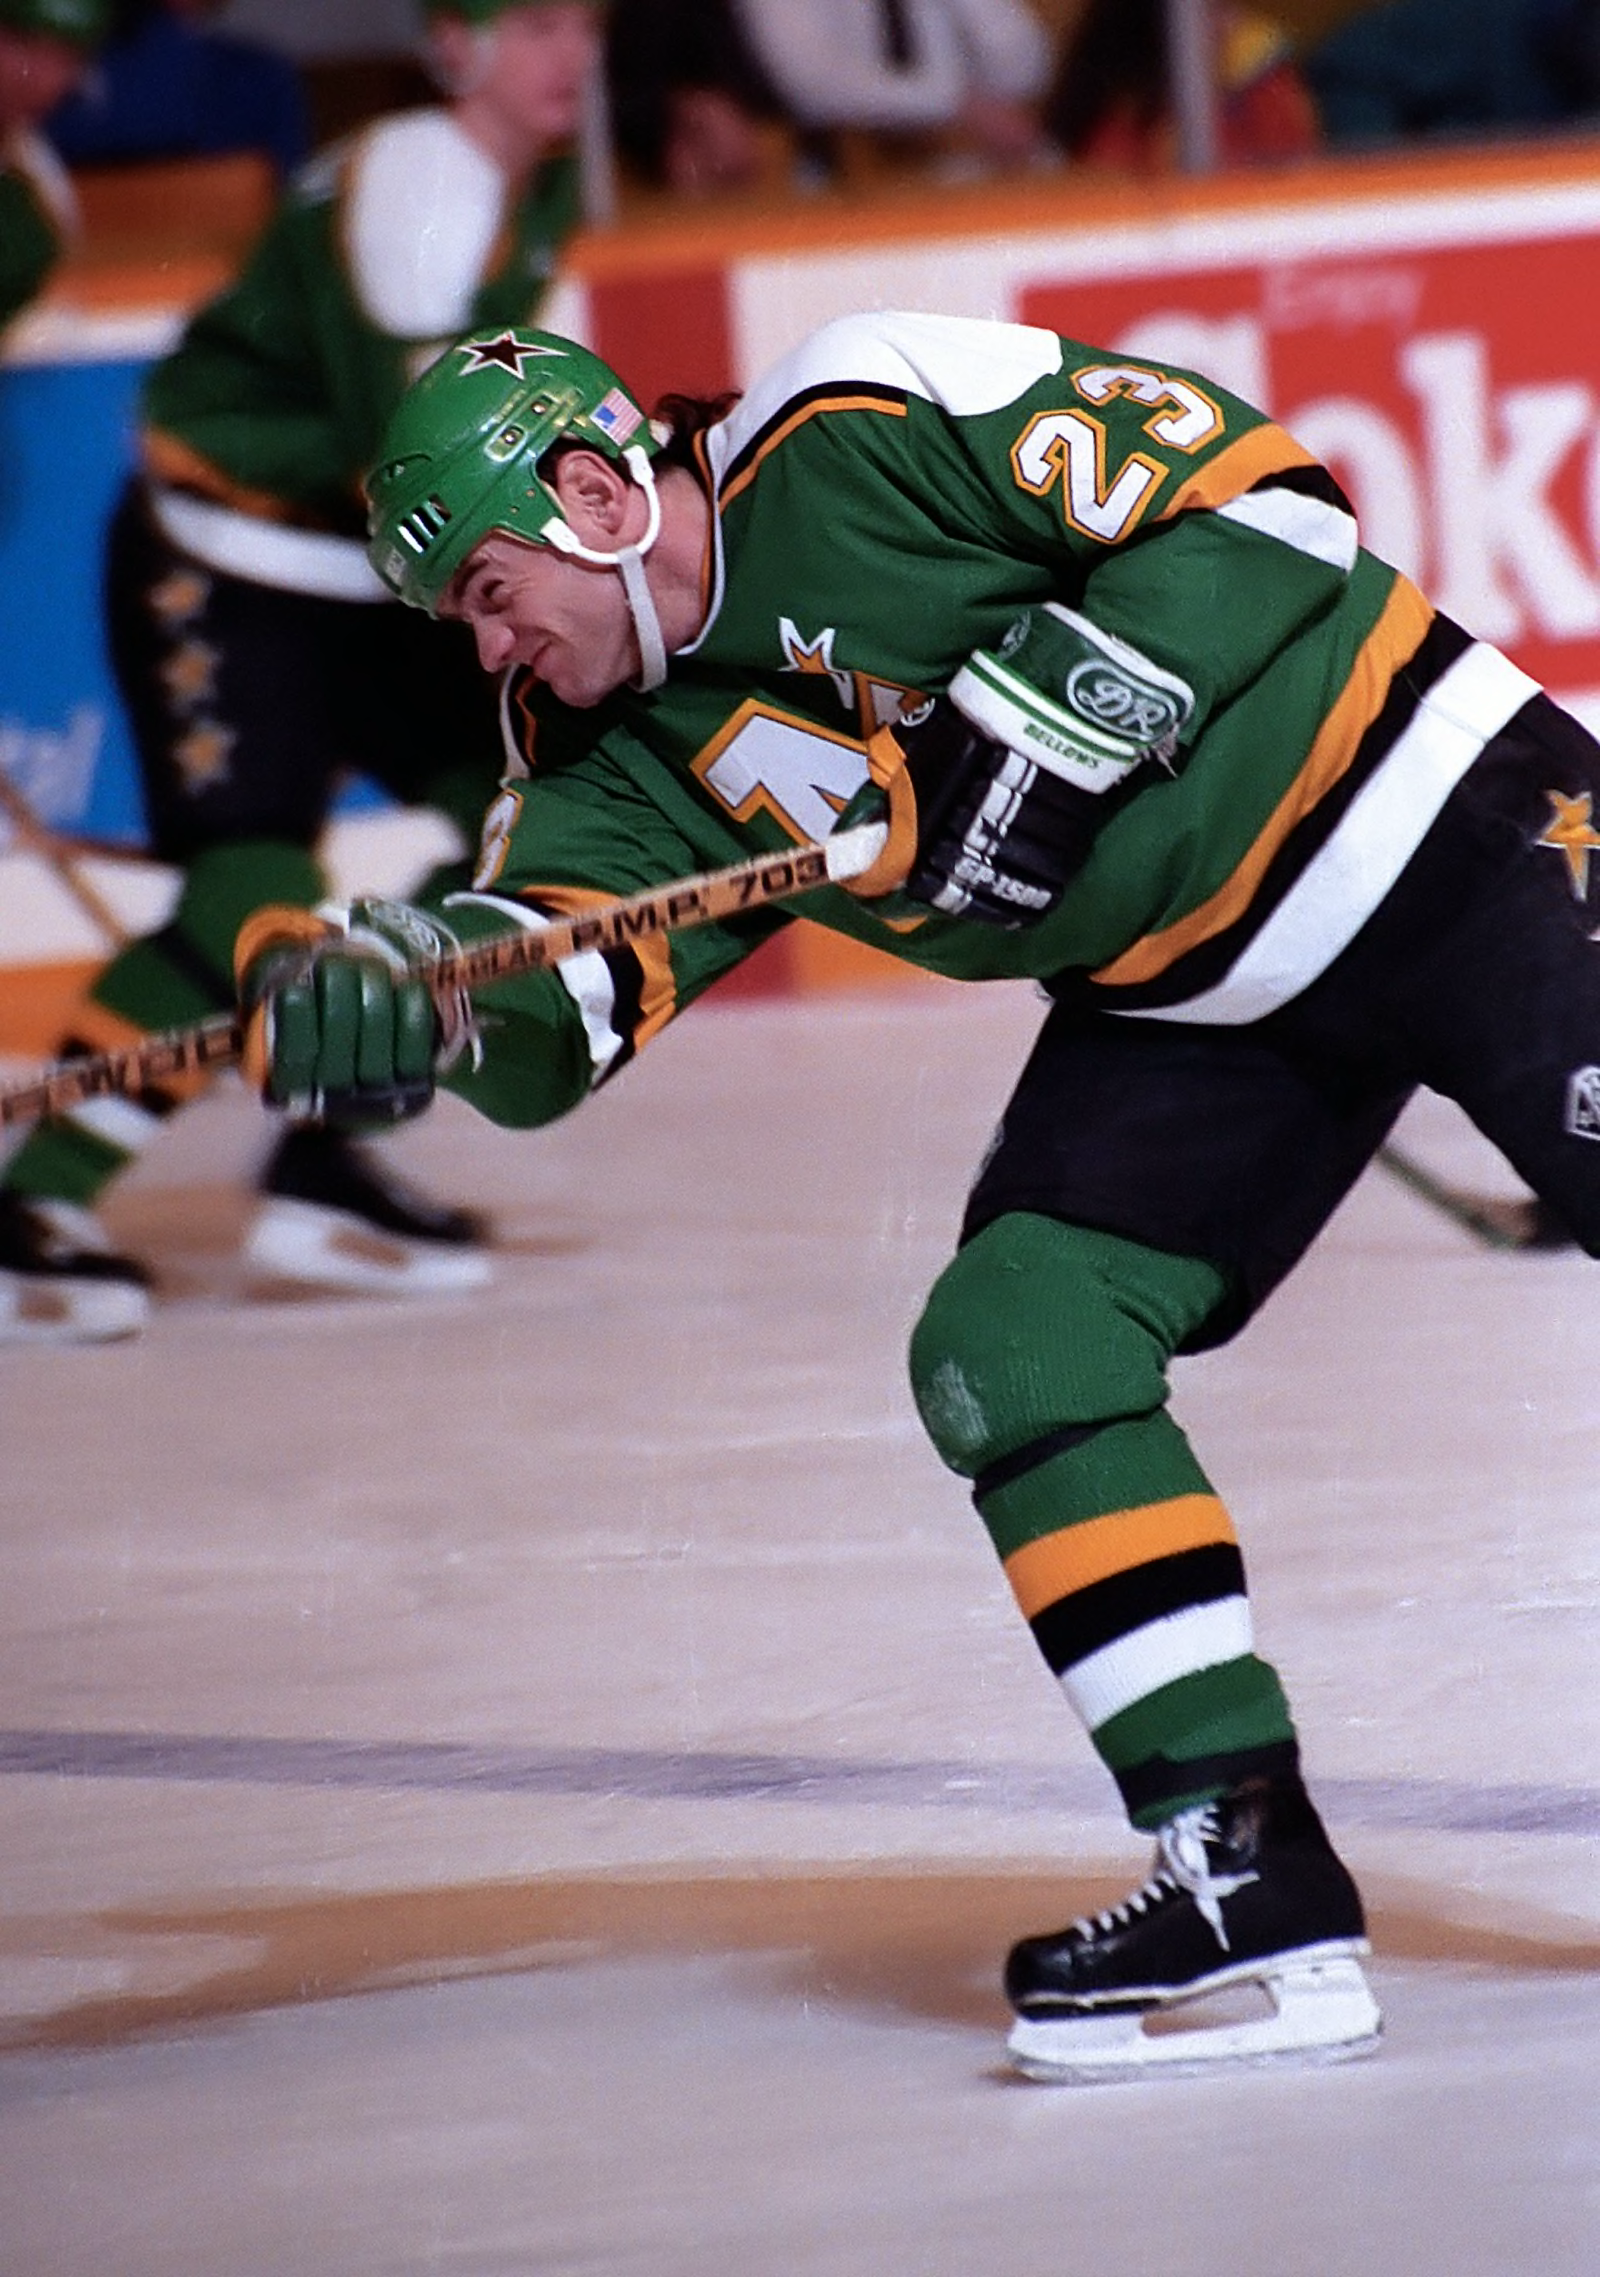 Mike Modano of the Minnesota North Stars skates on the ice during an  News Photo - Getty Images